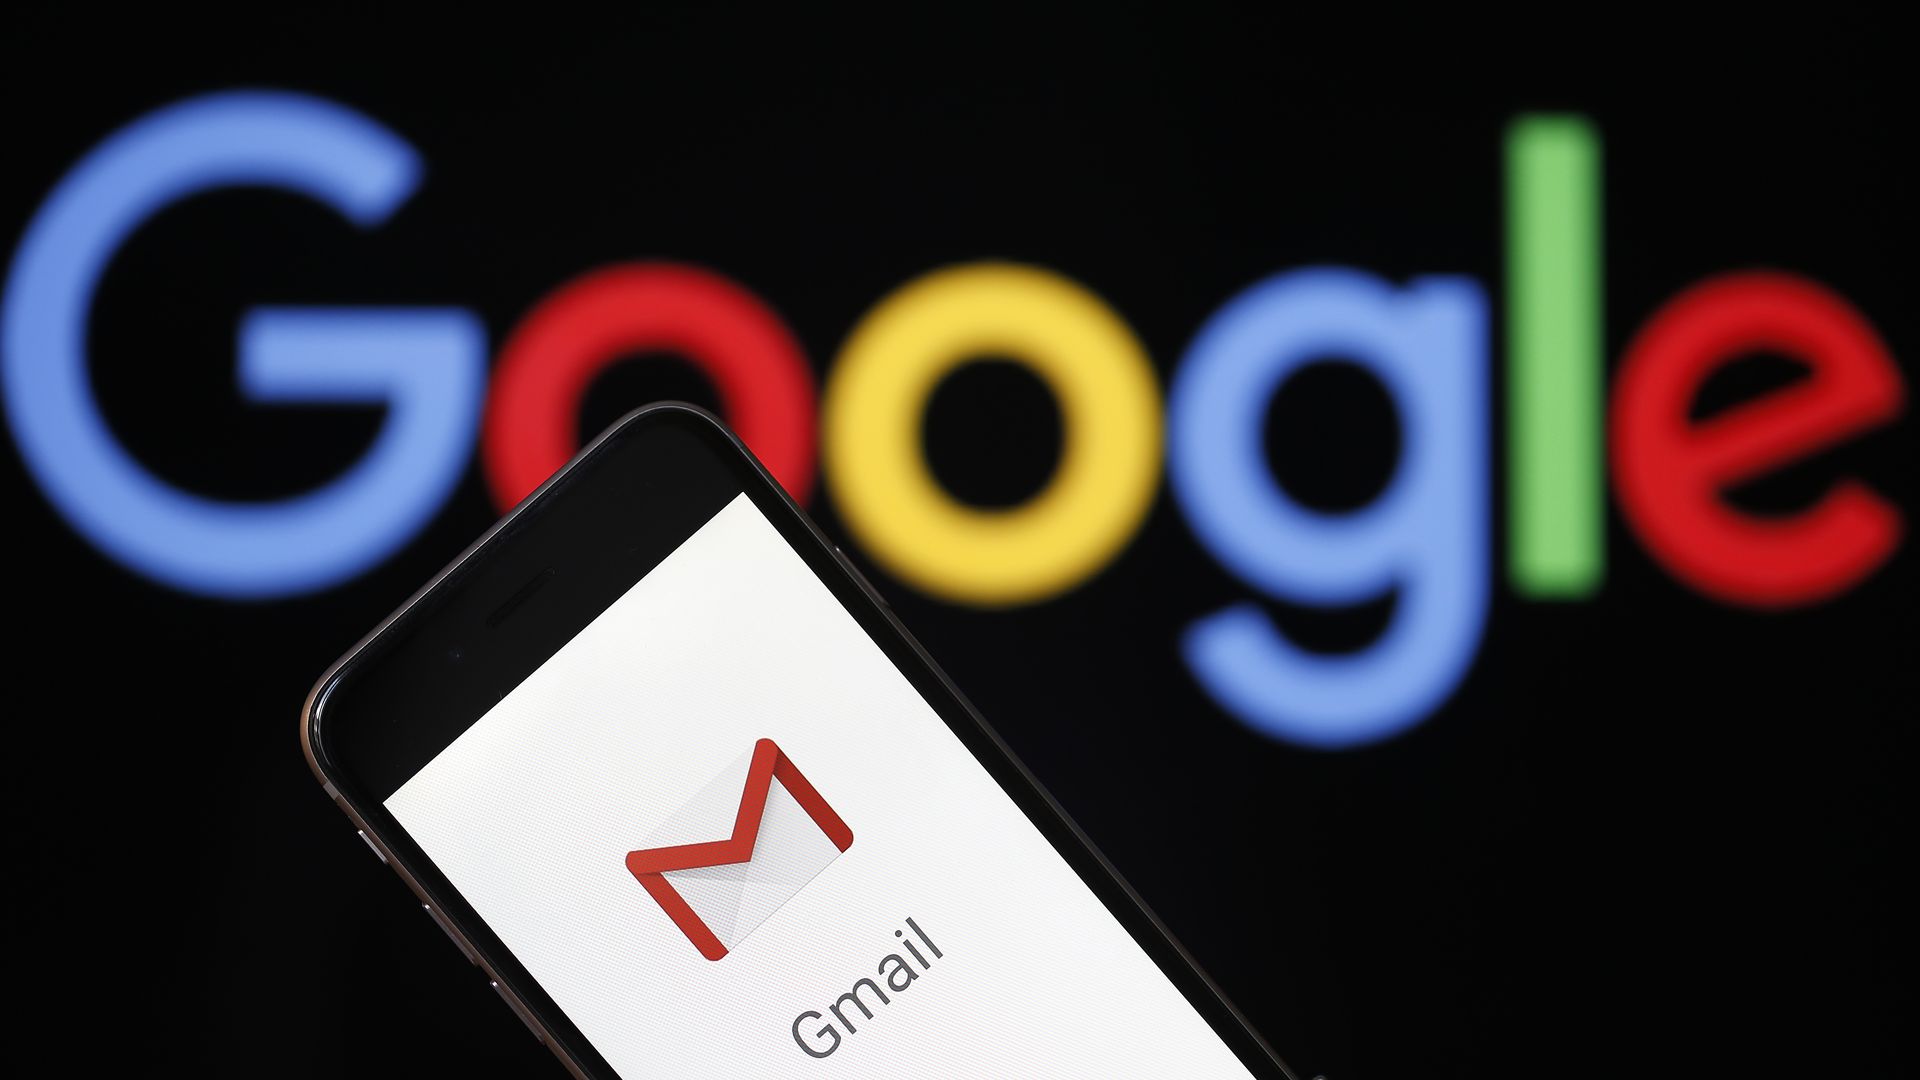 In this image, a phone screen with the Gmail logo is held in front of a large Google logo. 